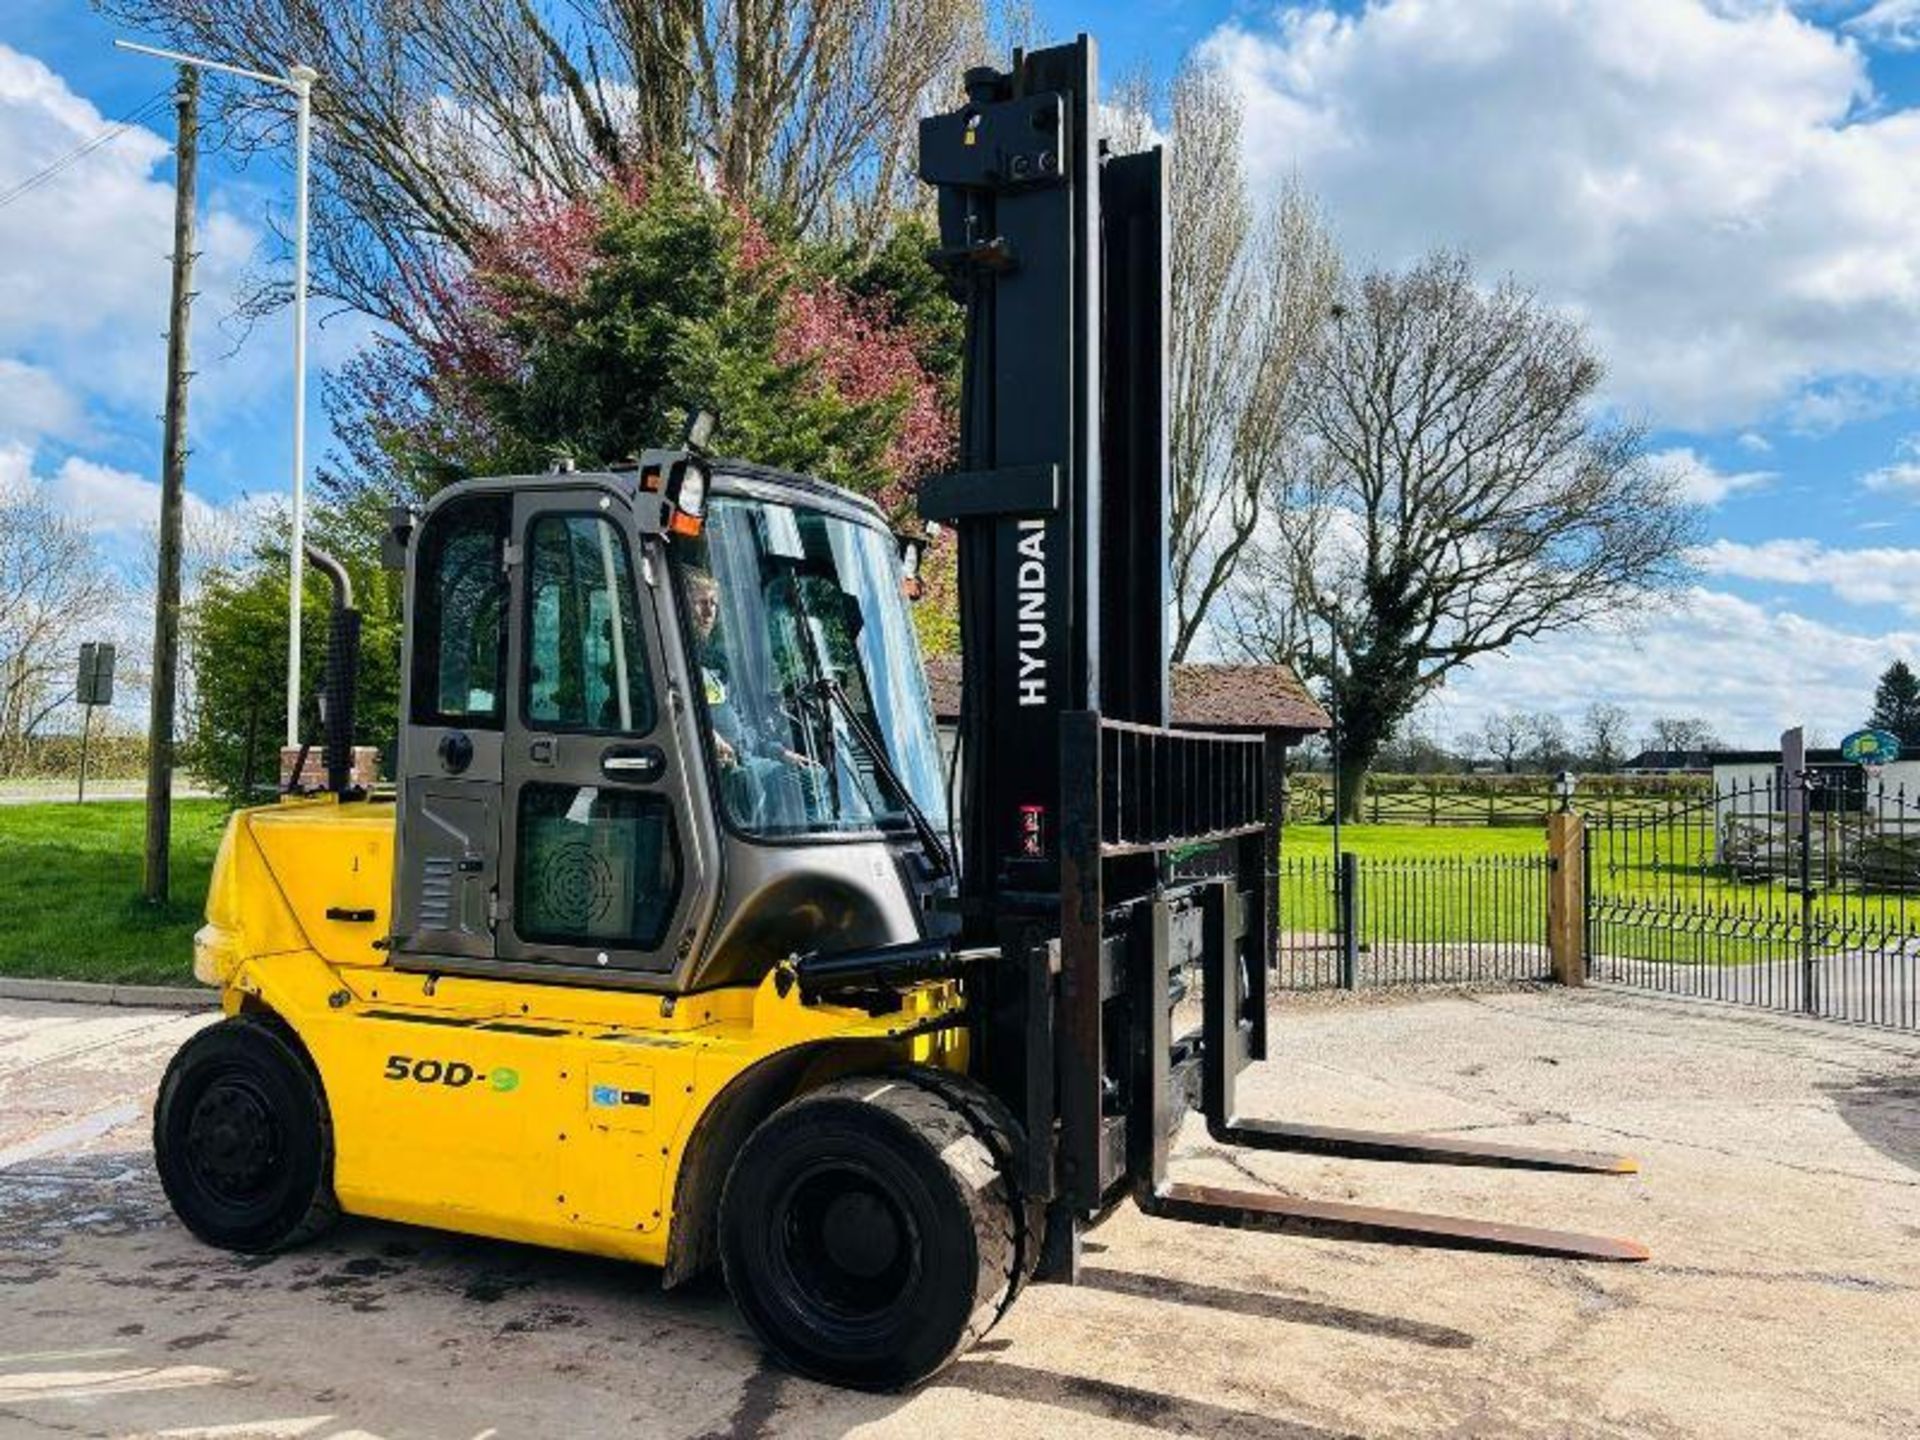 HYUNDAI 50D-9 DIESEL FORKLIFT *YEAR 2016, 5 TON LIFT* C/W SIDE SHIFT  - Image 11 of 19